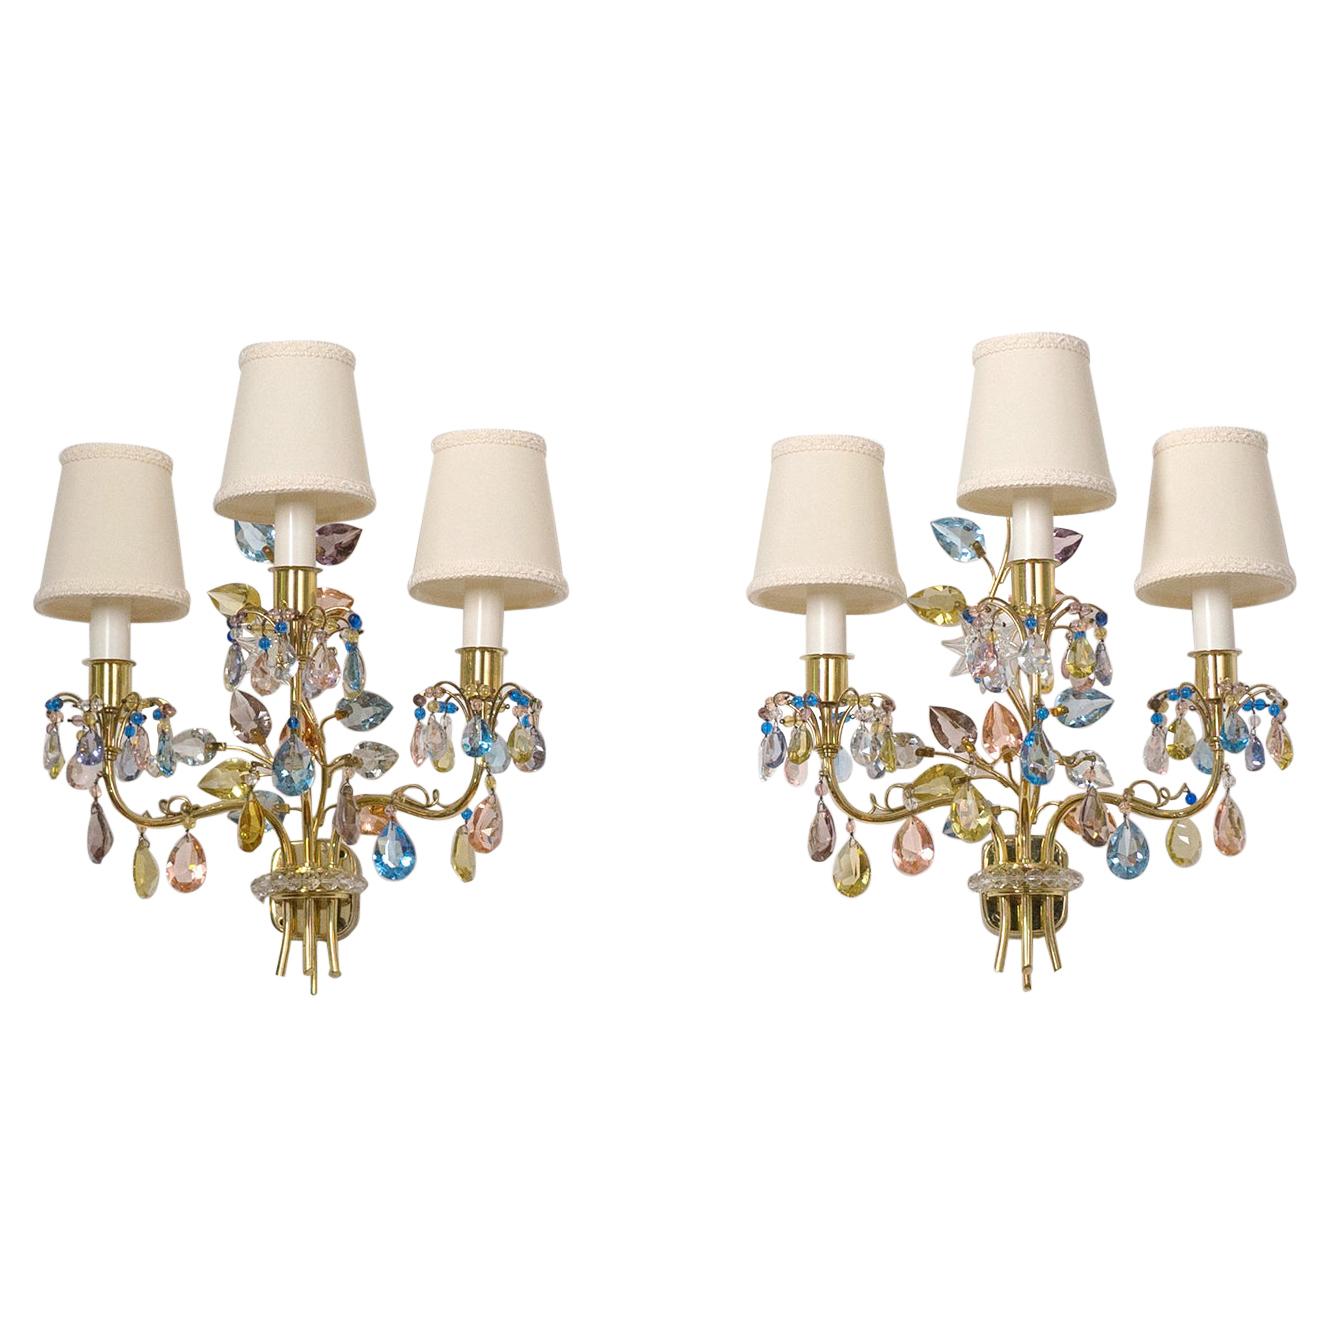 J&L Lobmeyr Wall Lights, 1950s, Colored Crystal and Brass